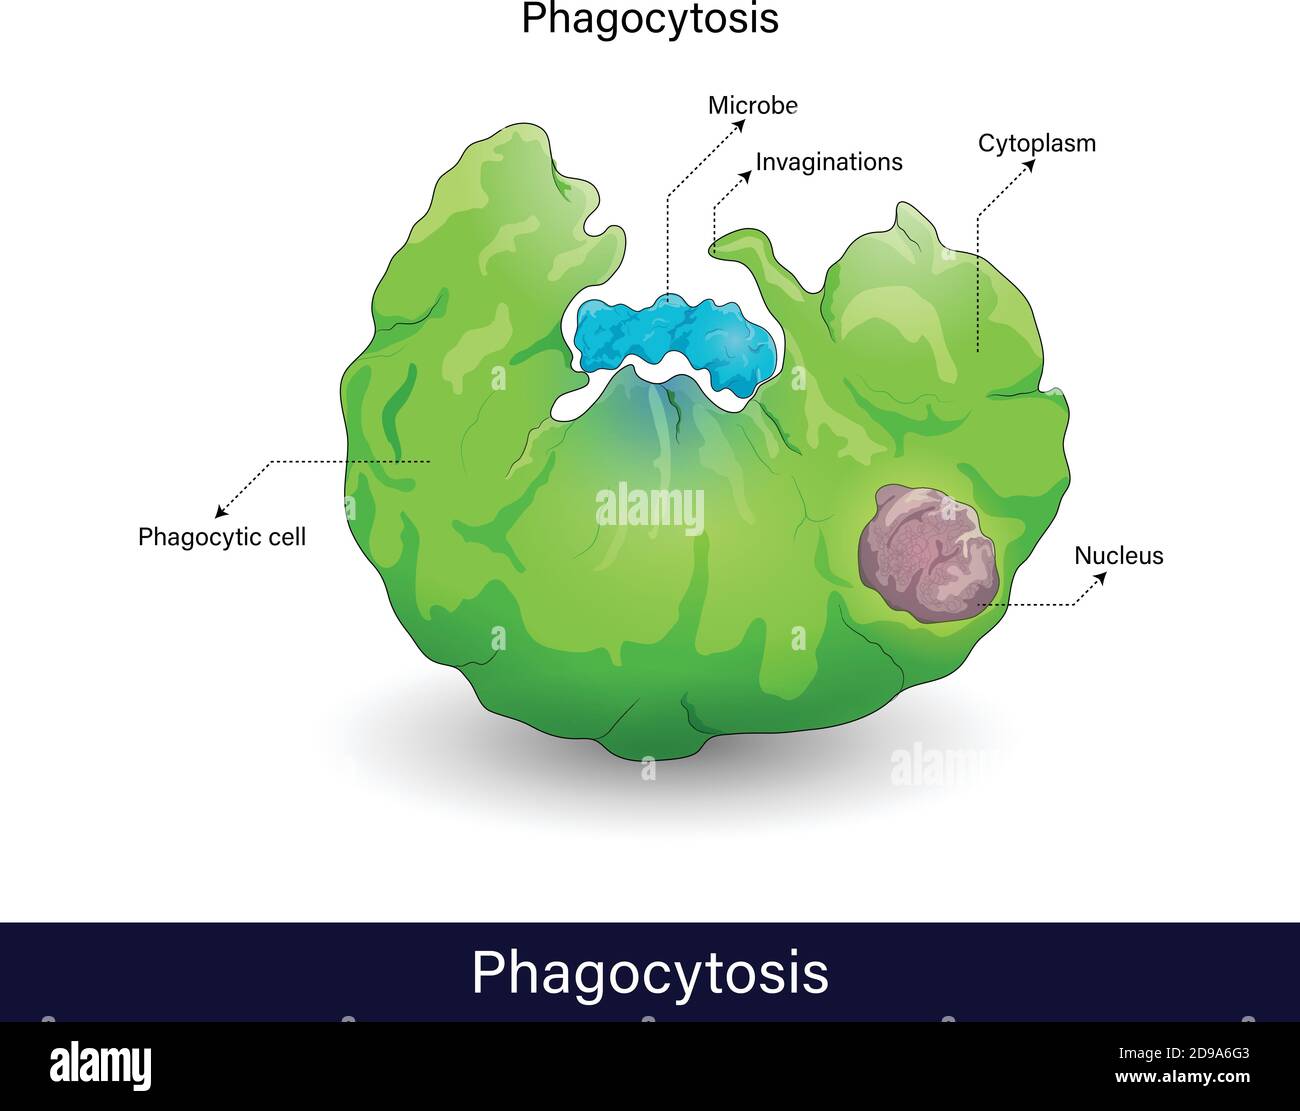 Mechanism of Phagocytosis process. endocytosis of microbe, phagocytosis by immune cells (macrophage, neutrophil, dendritic cell). cell eating, isolate Stock Vector